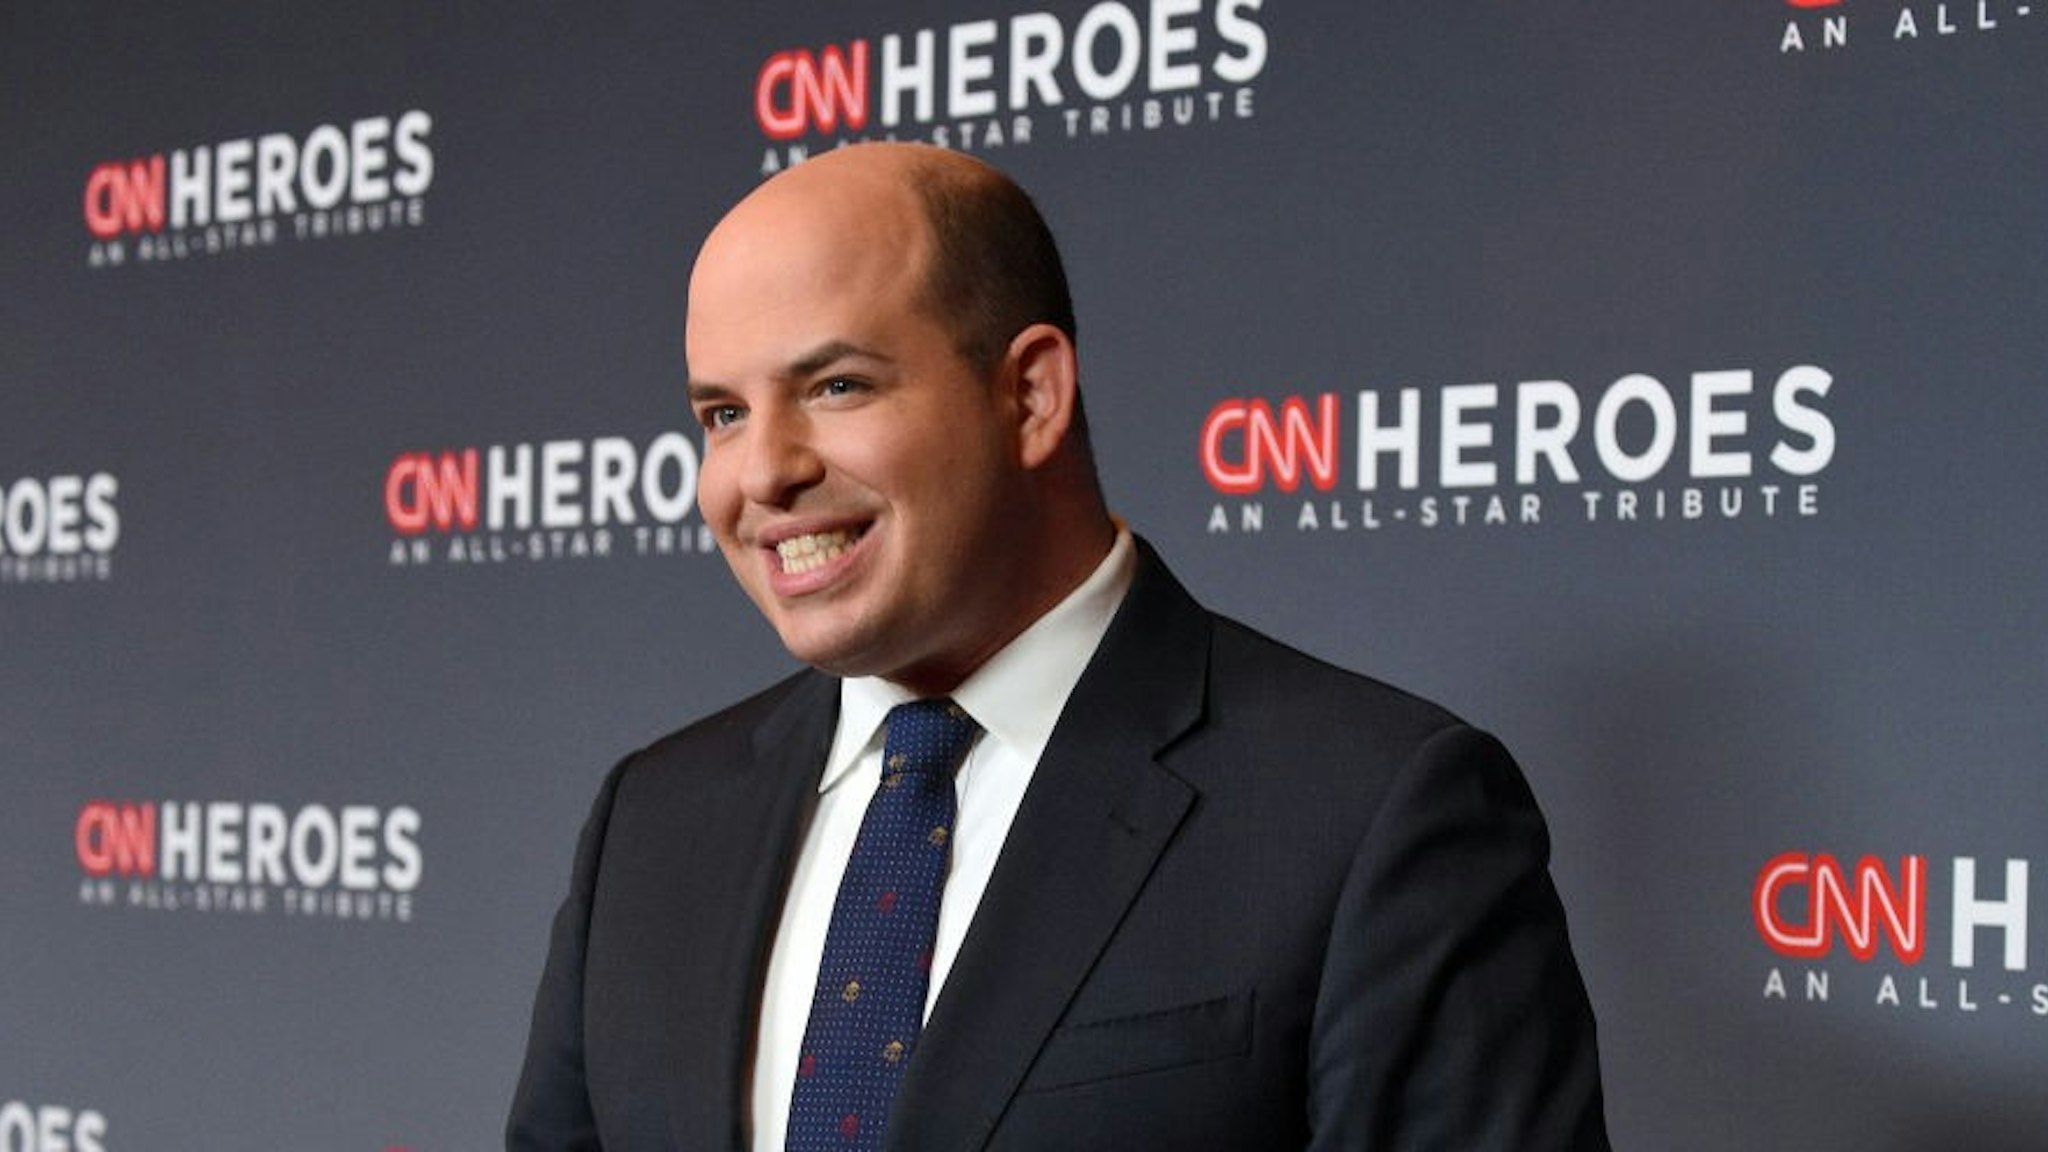 Brian Stelter attends CNN Heroes at the American Museum of Natural History on December 08, 2019 in New York City.